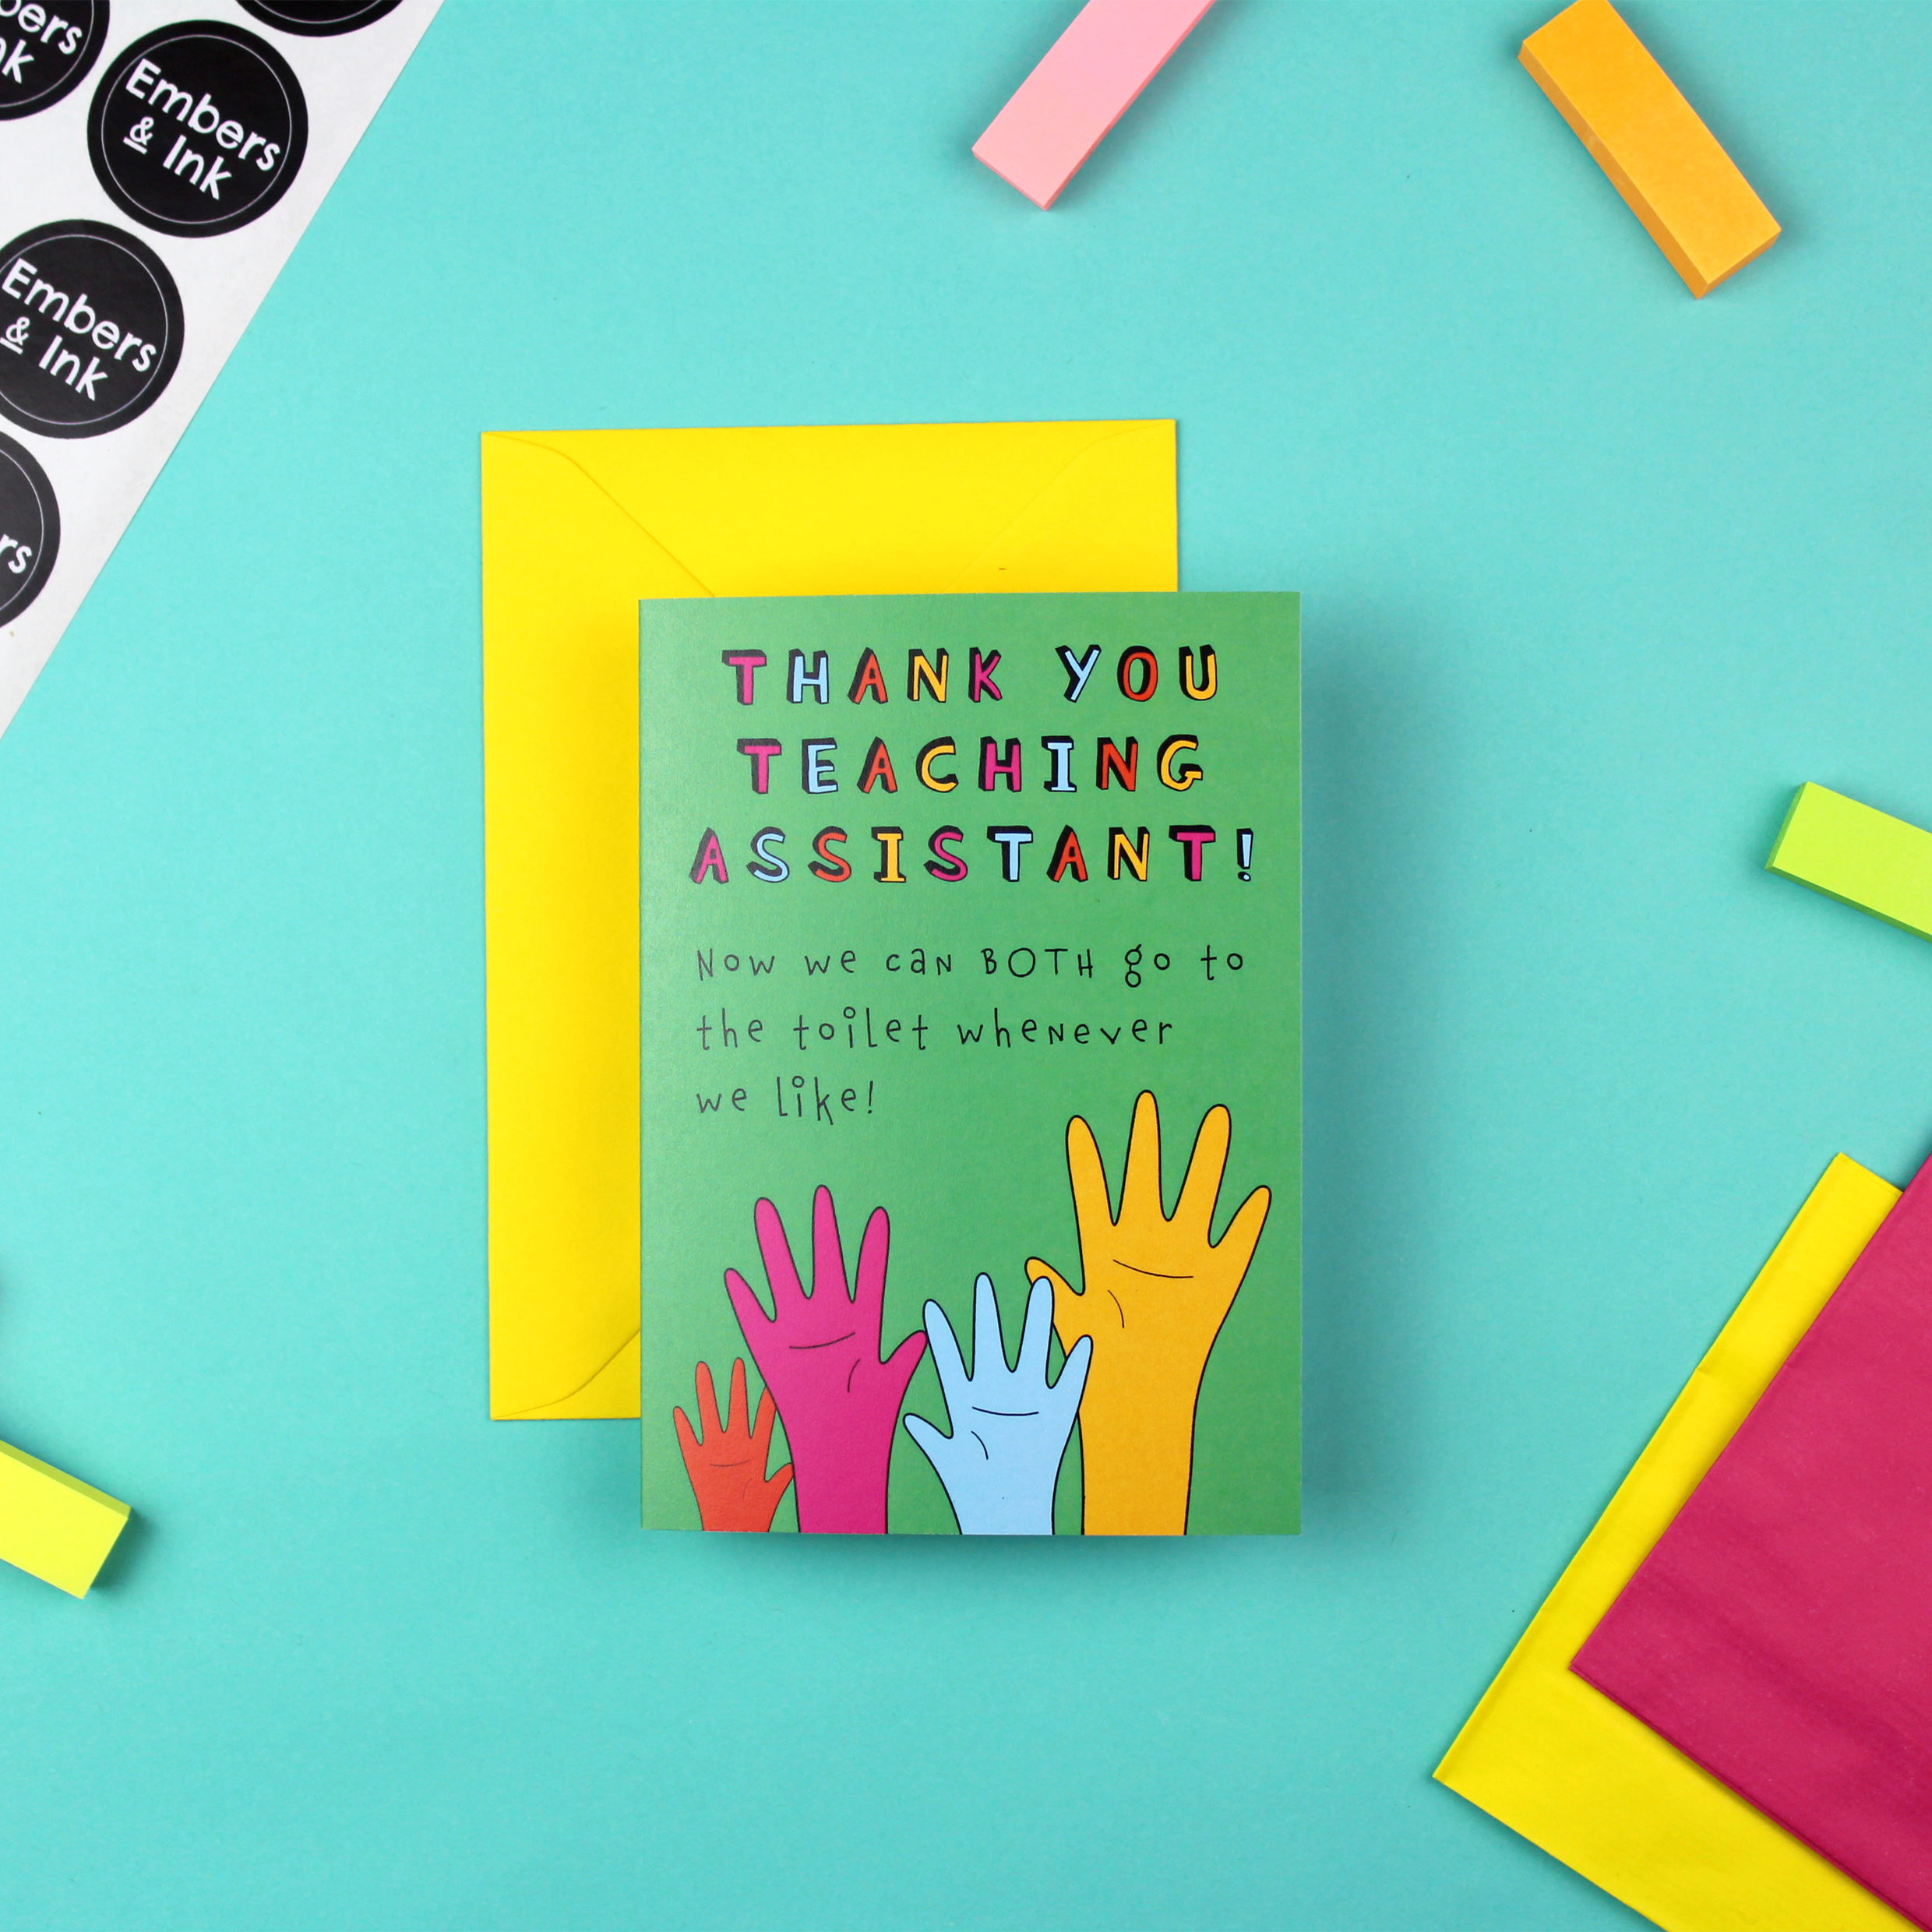 The image shows a brightly coloured card and a yellow envelope. The card is green an features an illustration of four raised hands in orange pink blue and yellow. Above it are the words 'Thank you teaching assistant! Now we can both go to the toilet whenever we like!'